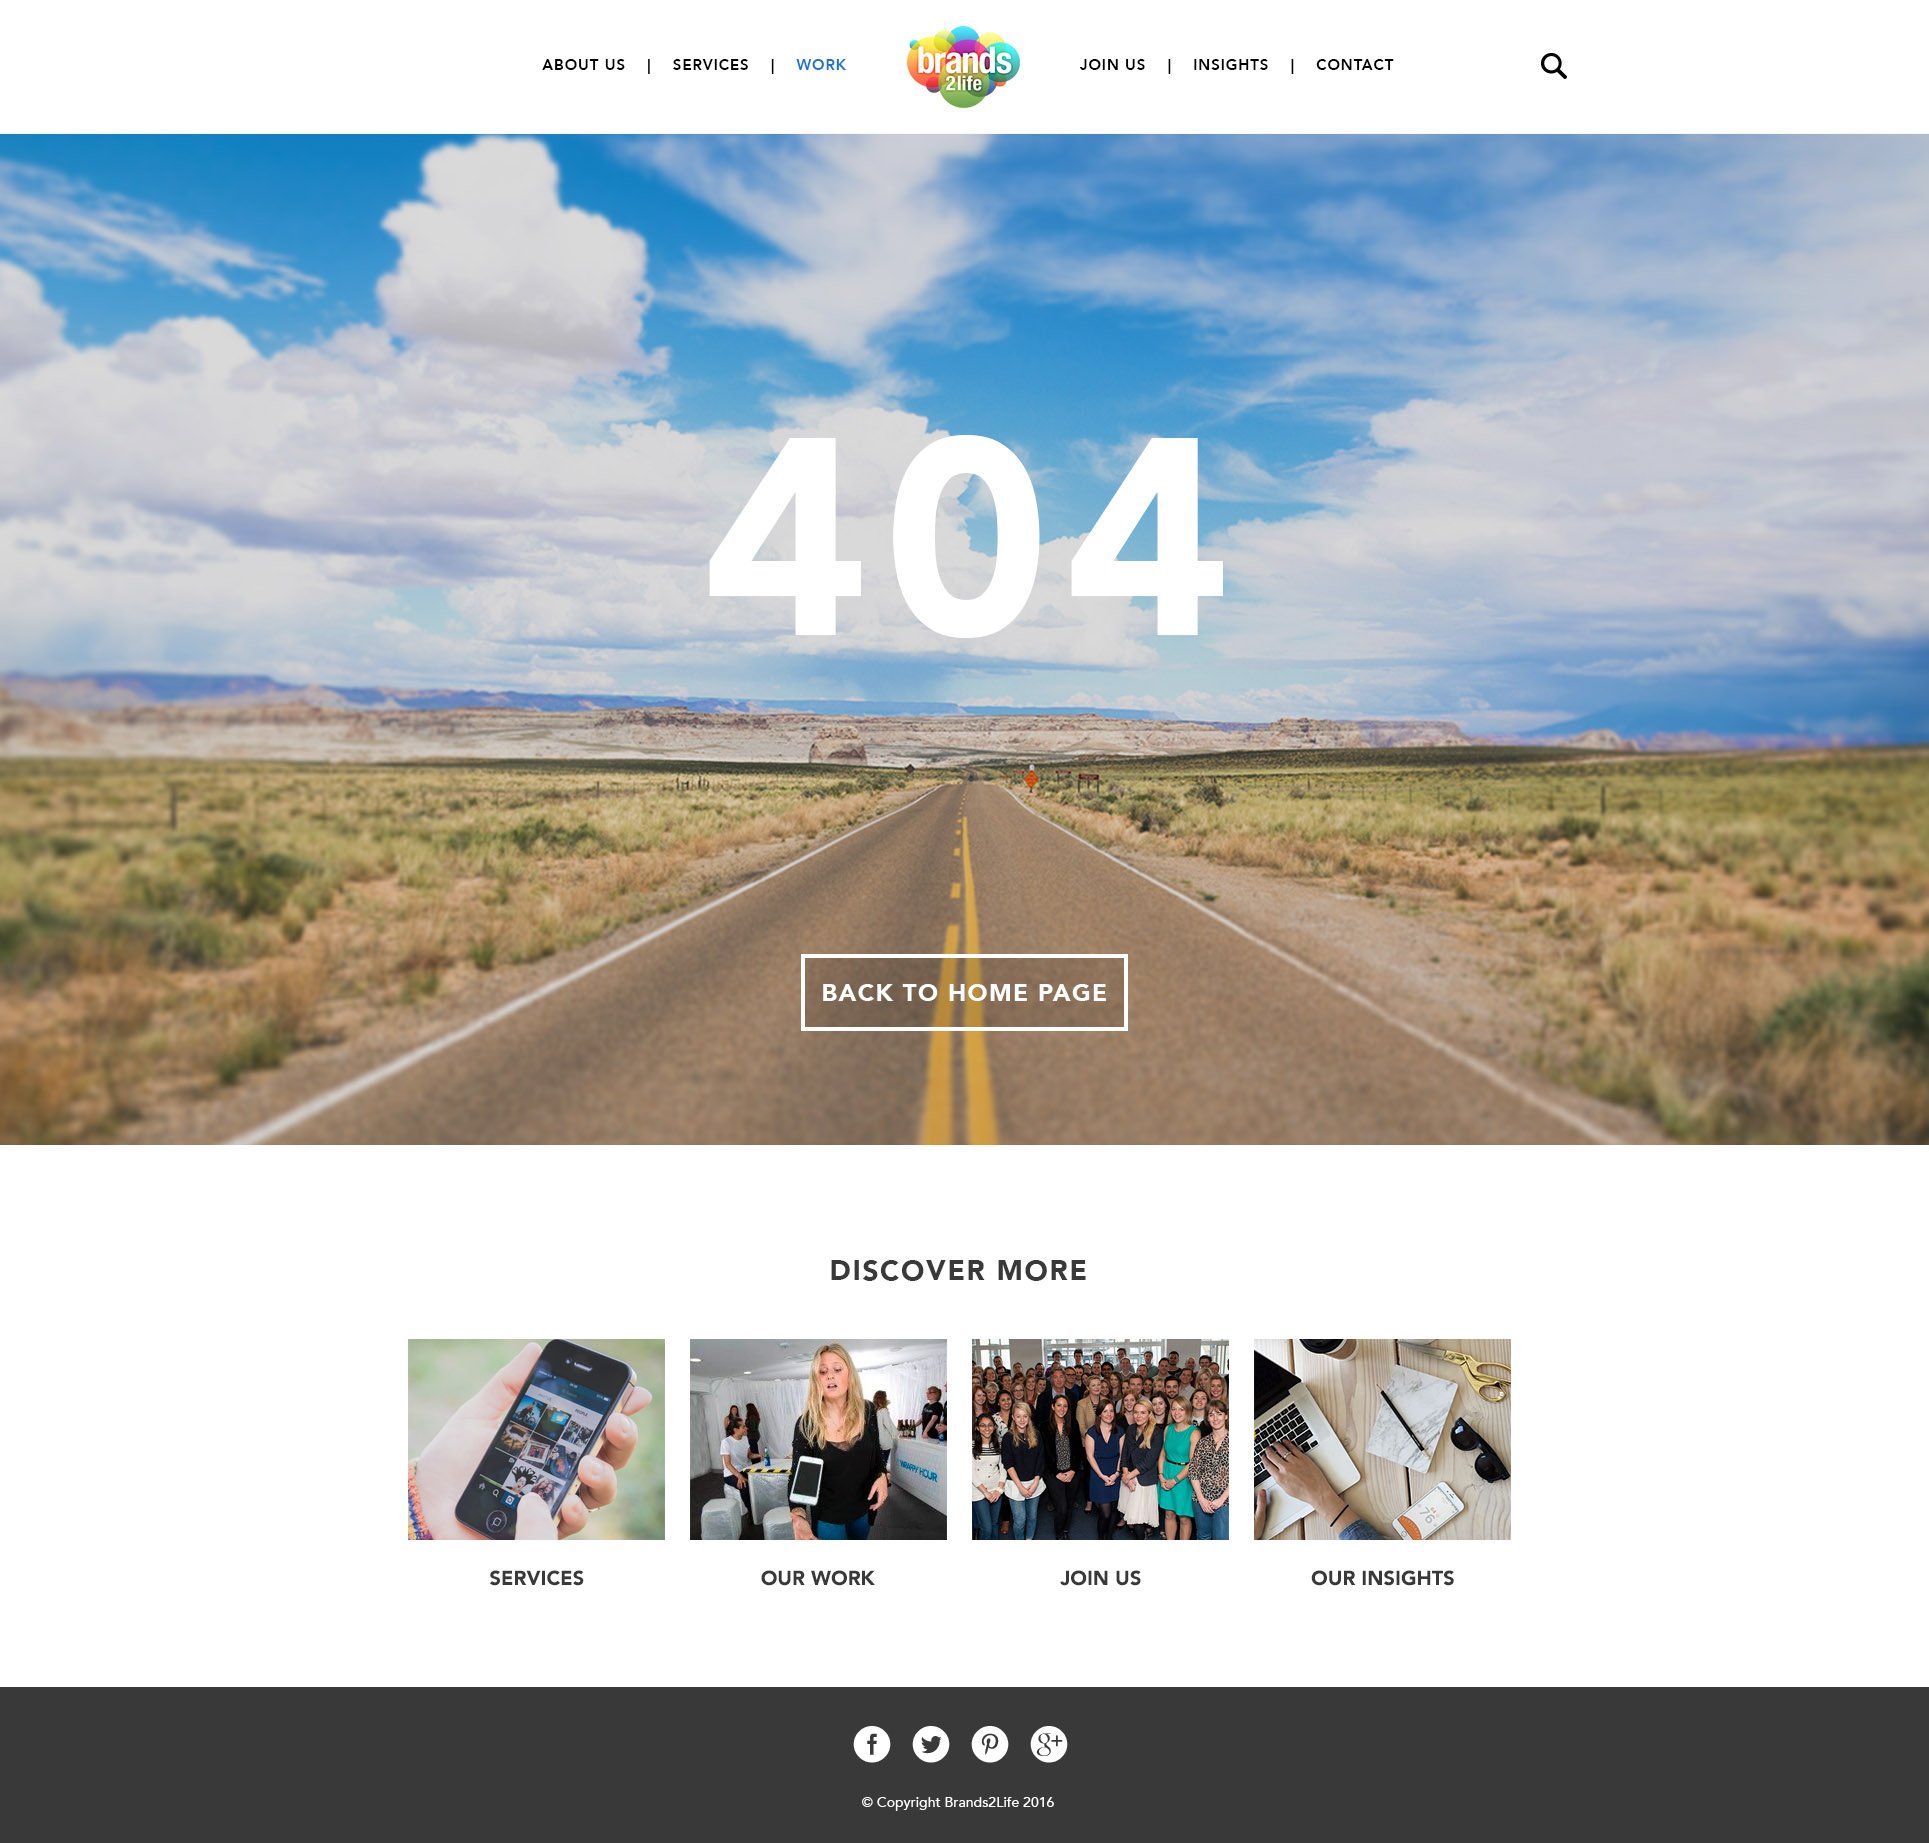 404 page mockup for Brands2Life's new website